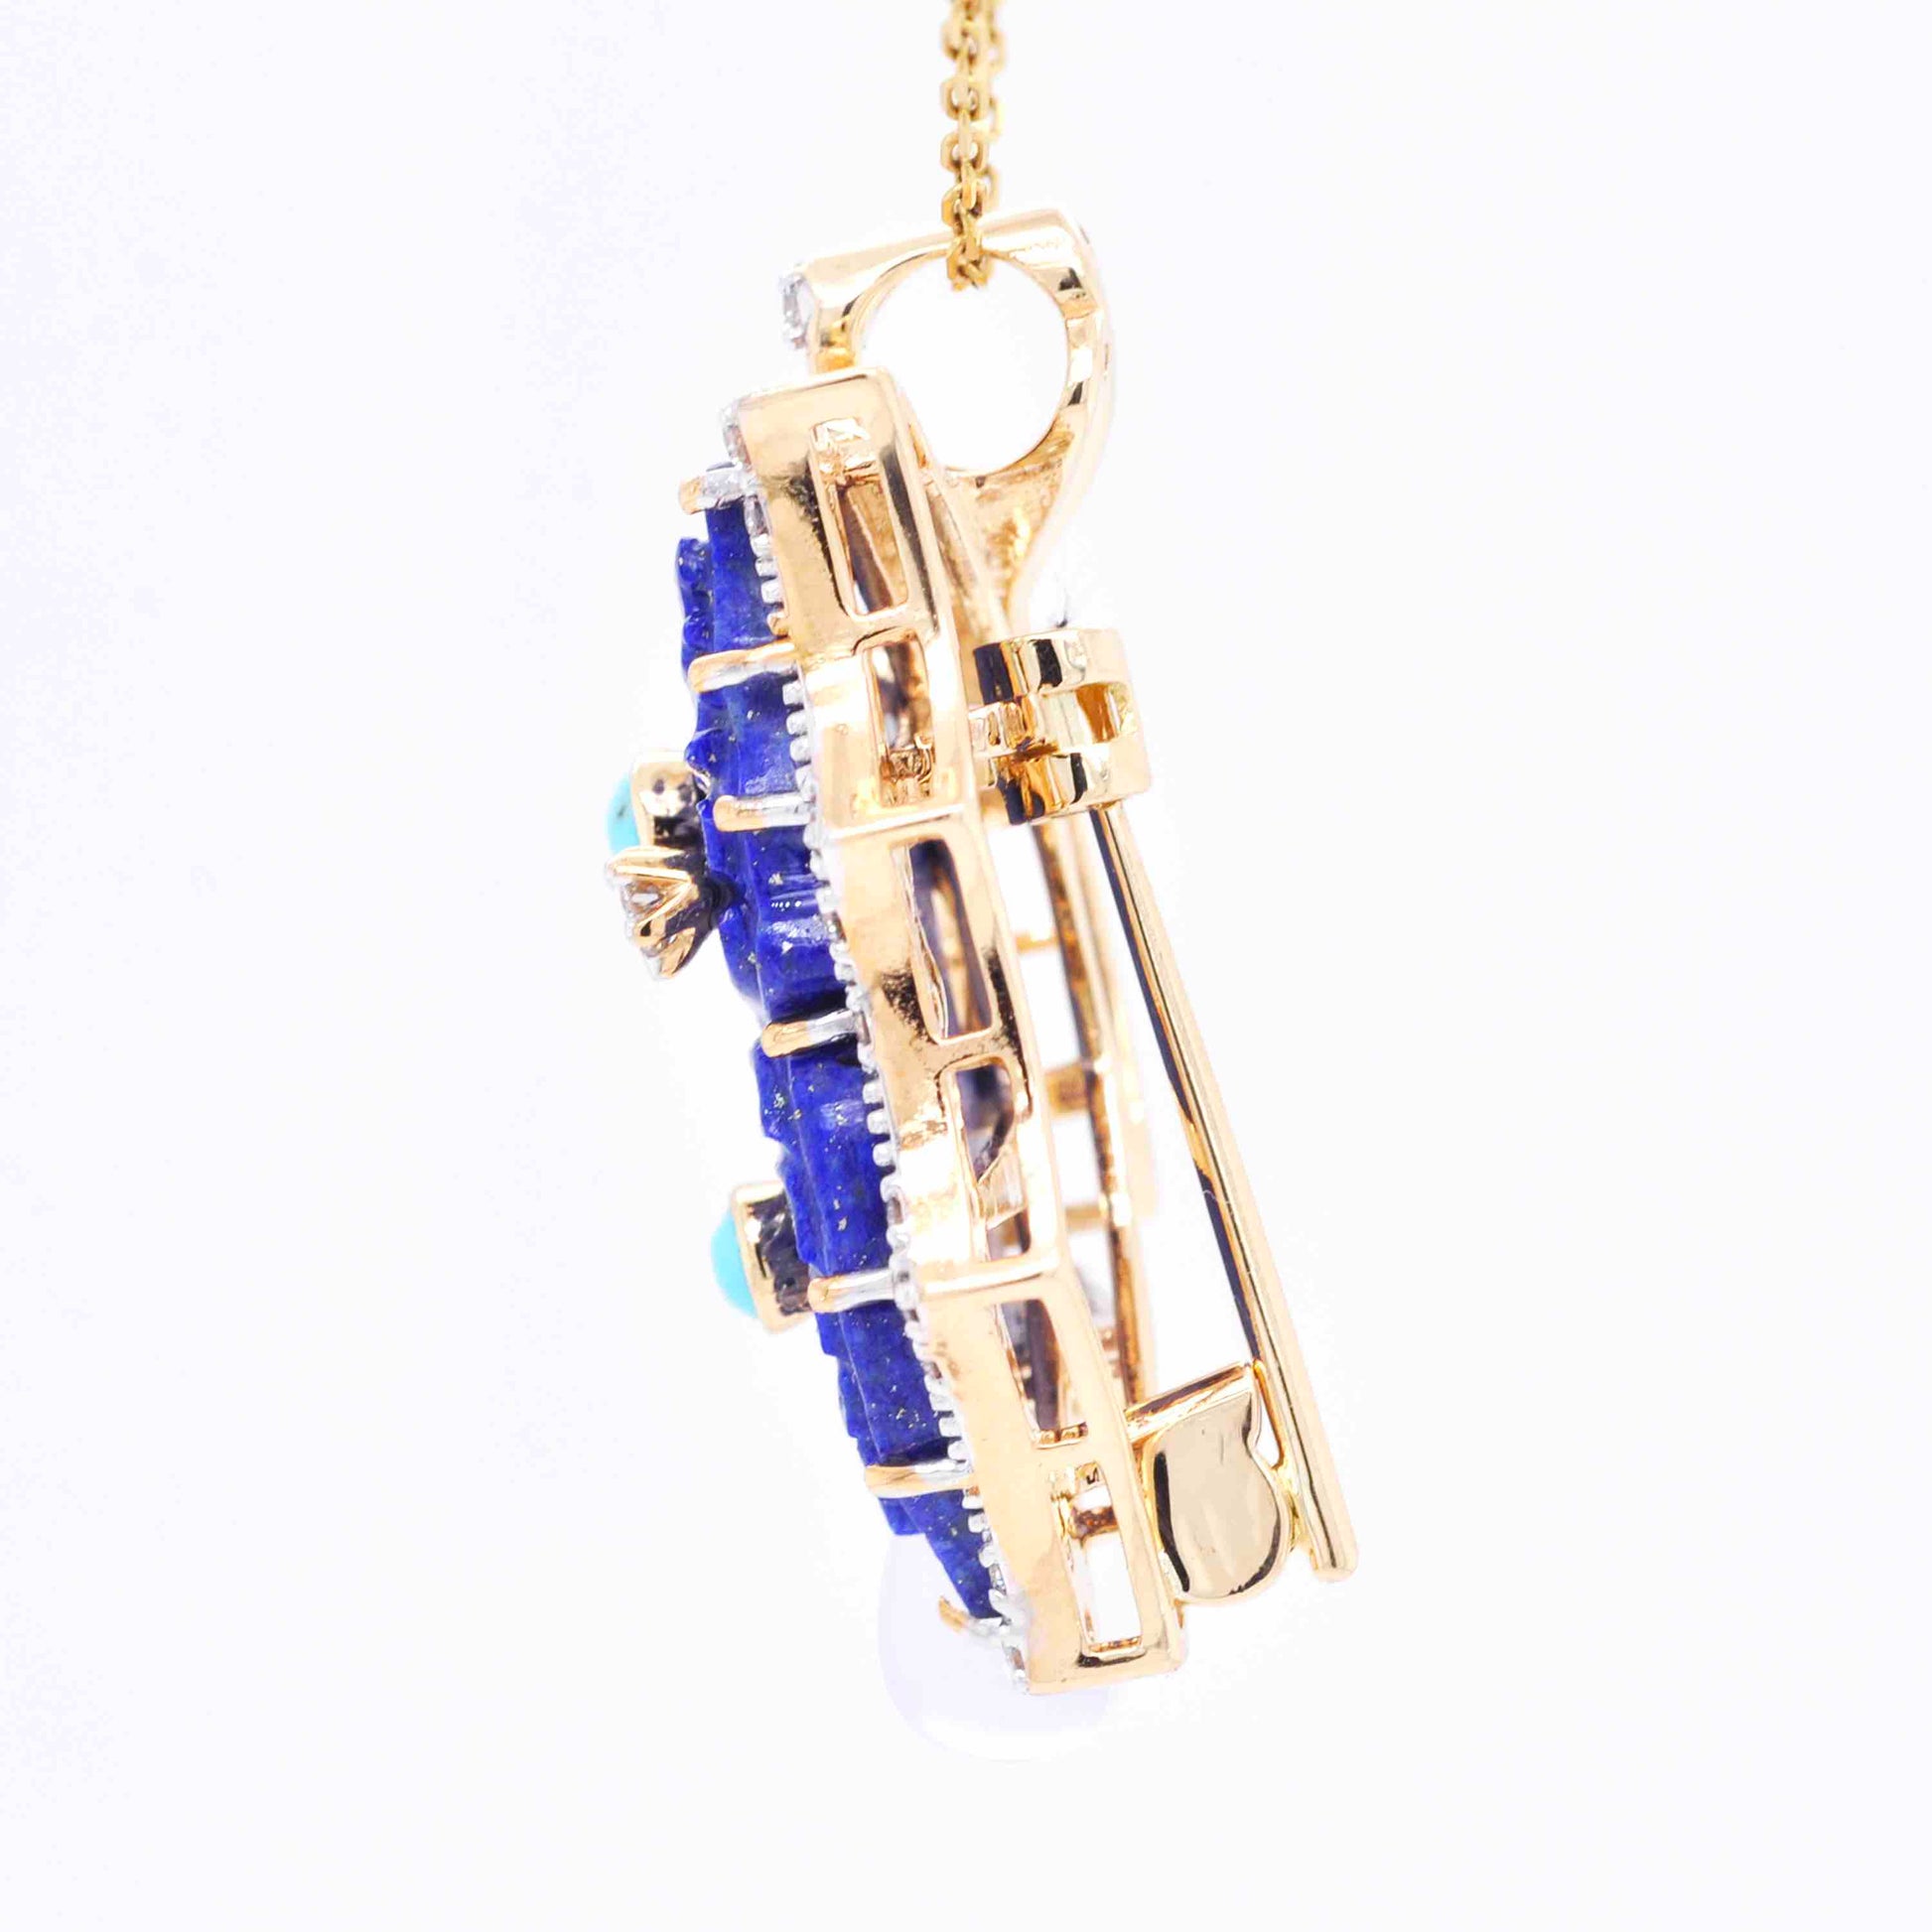 Exquisite Lapis Lazuli Butterfly Carving Turquoise Moonstone Pendant Brooch with fine craftsmanship